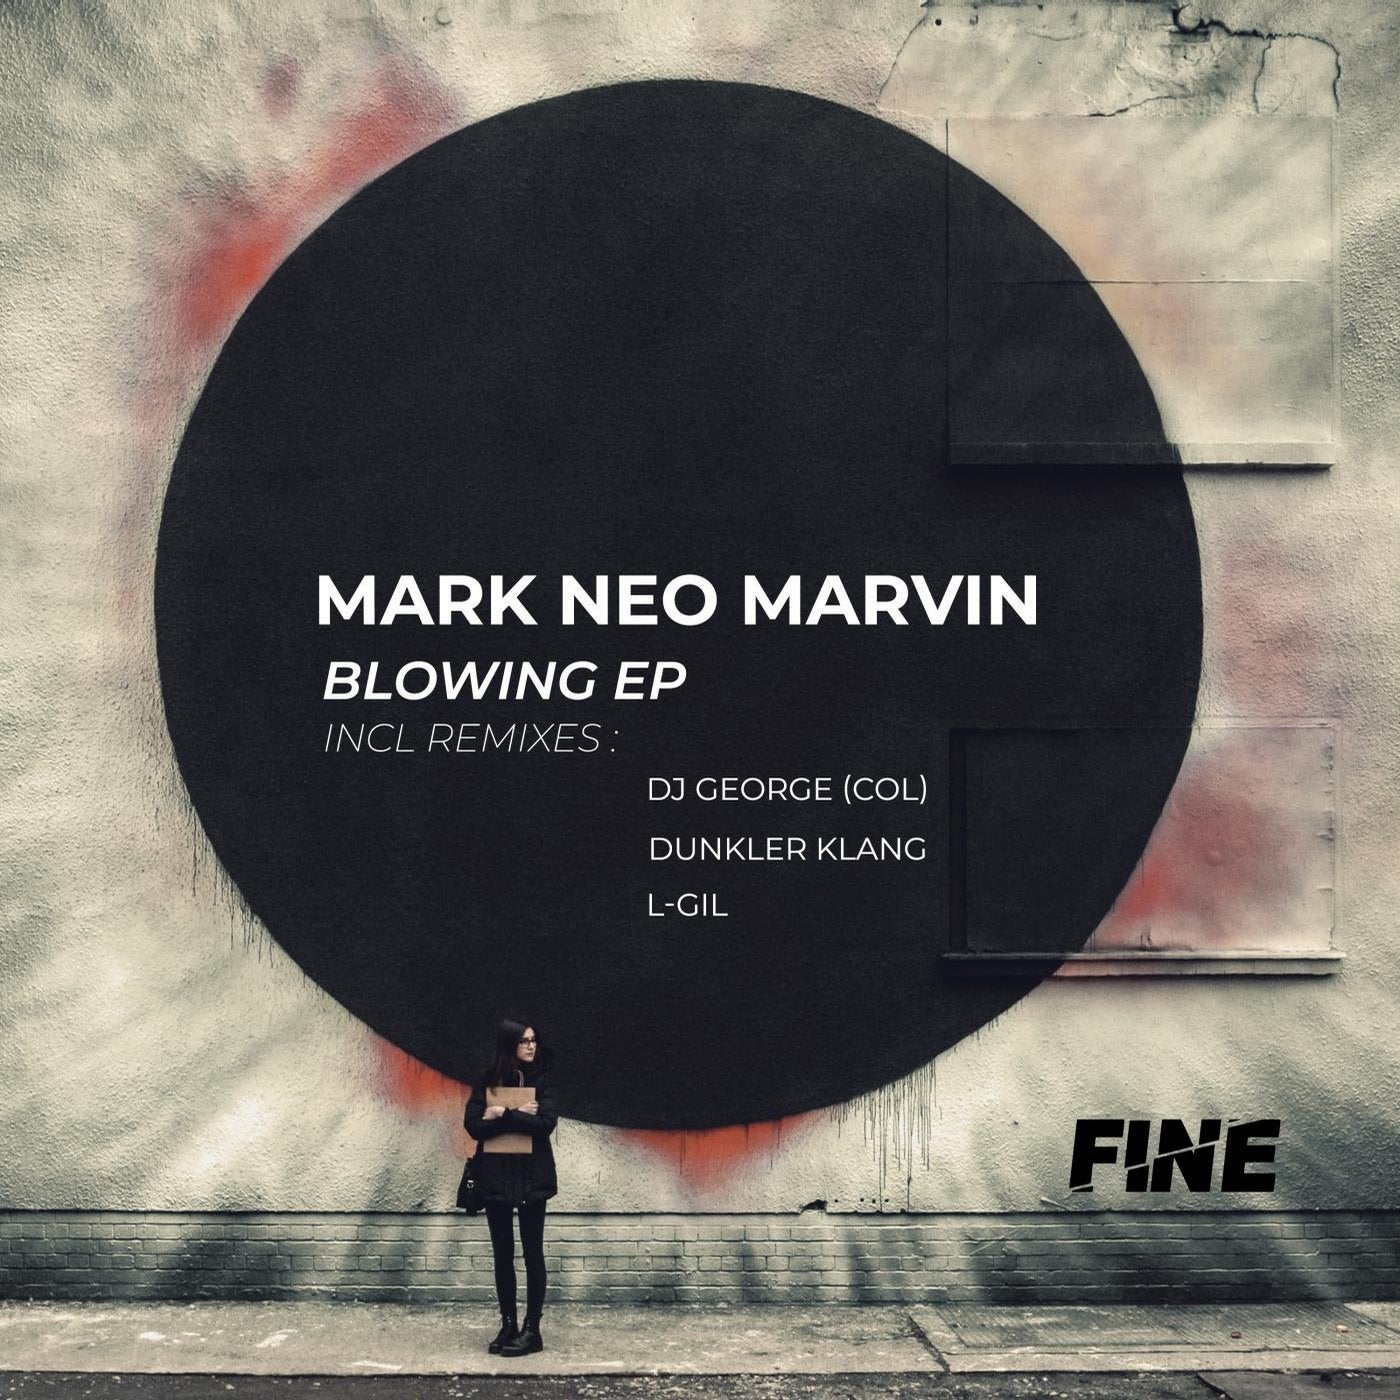 Blowing EP